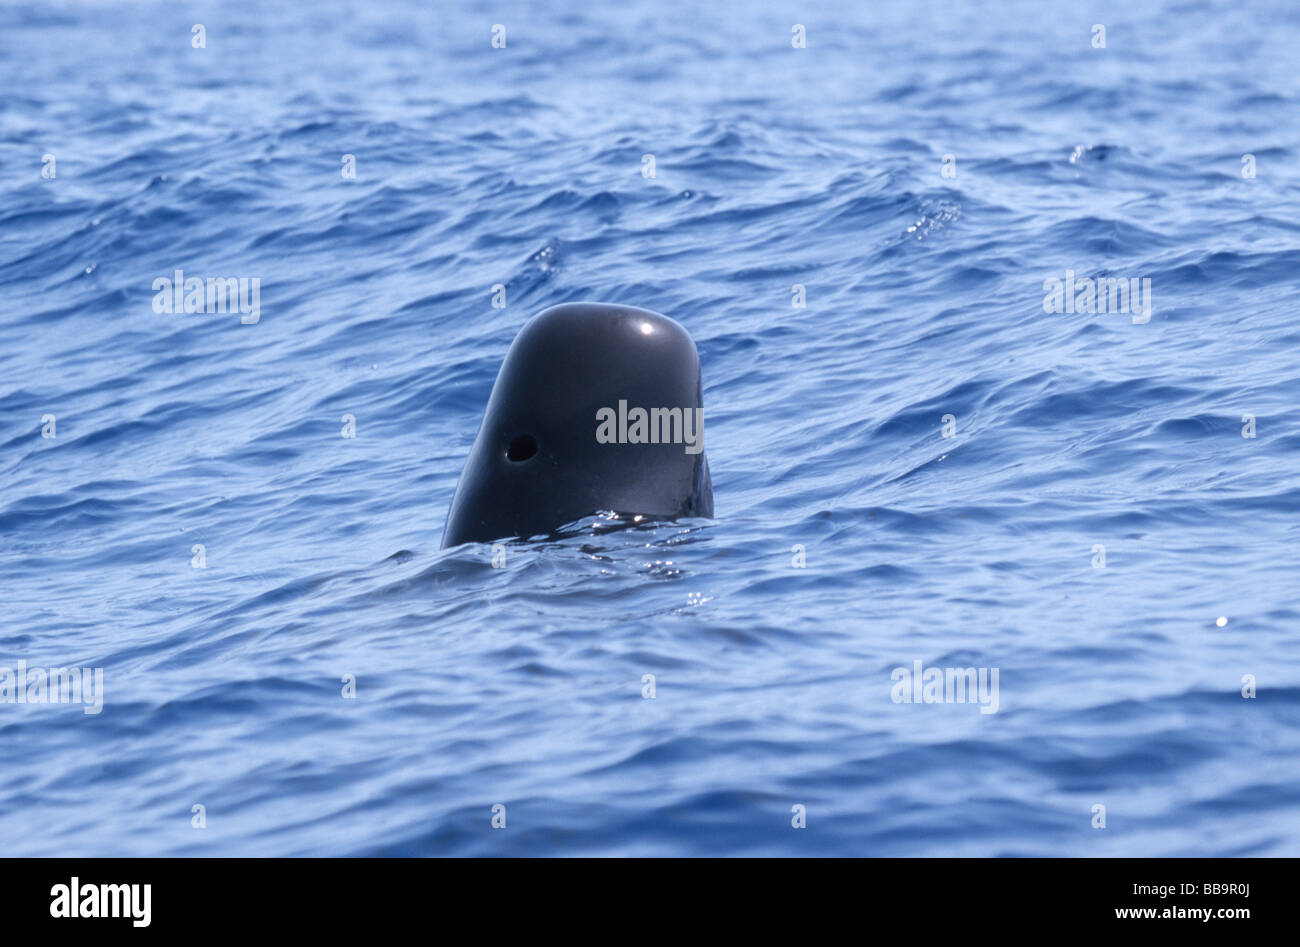 Short-finned pilot whale spyhops to orientate visually at the water surface, Tenerife, Canary Islands Stock Photo